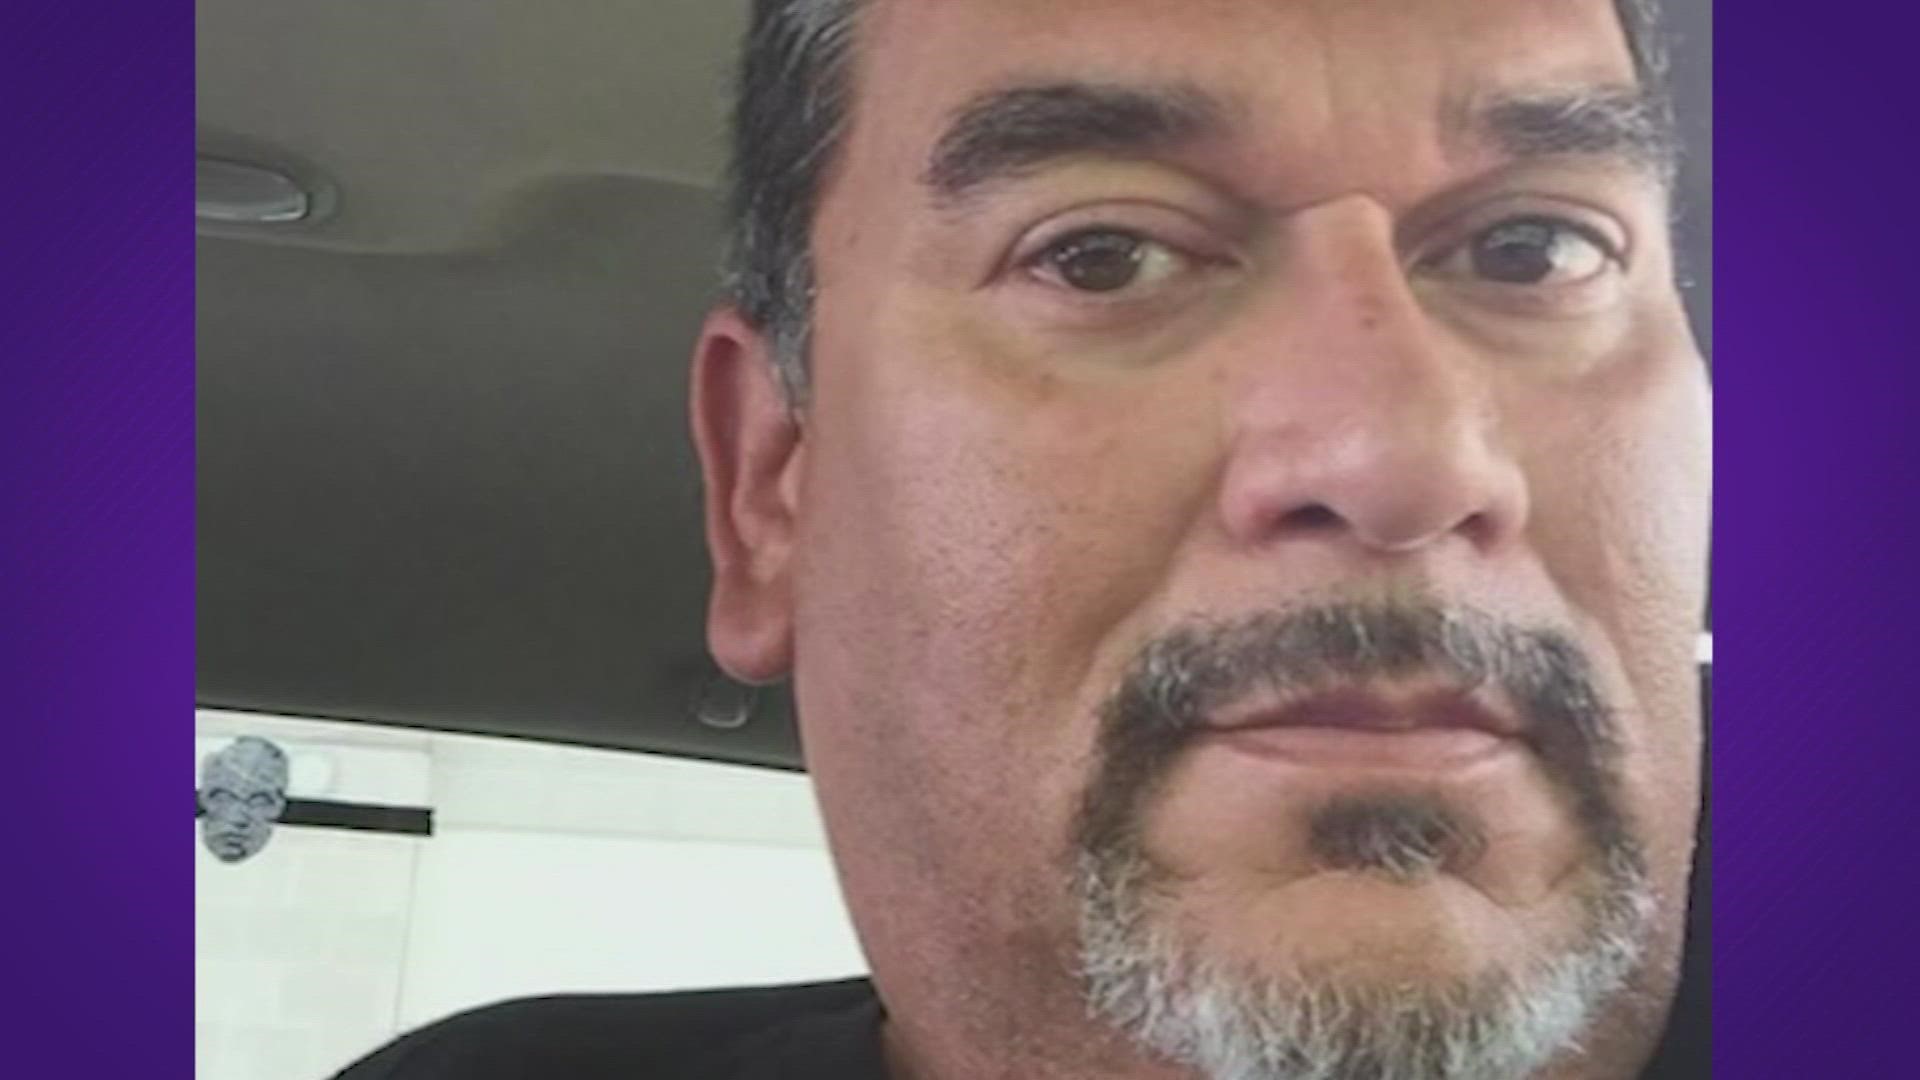 Beloved Tomball ISD bus driver Tony Moreno died nine days after he started experiencing symptoms of COVID, his friend said.